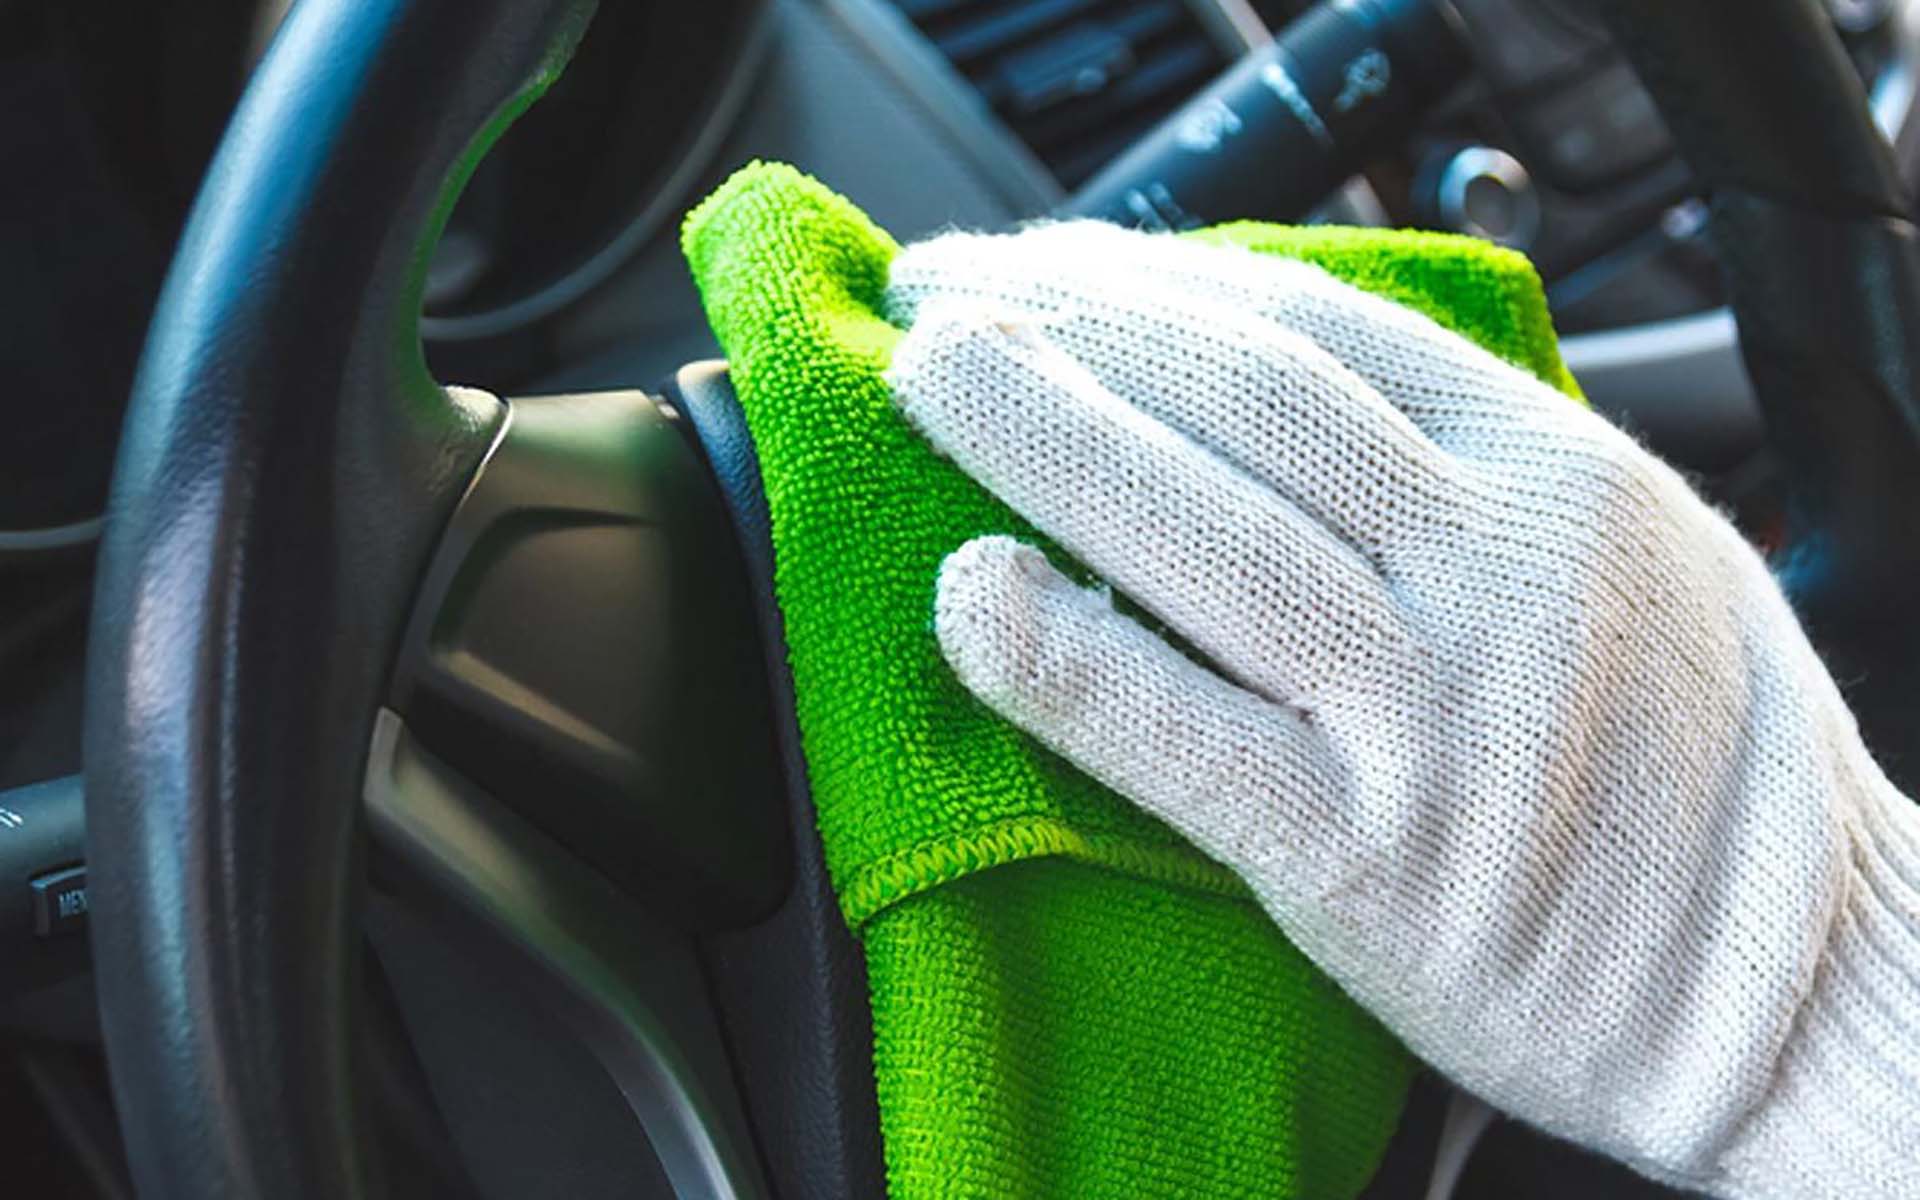 How to clean inside your car?